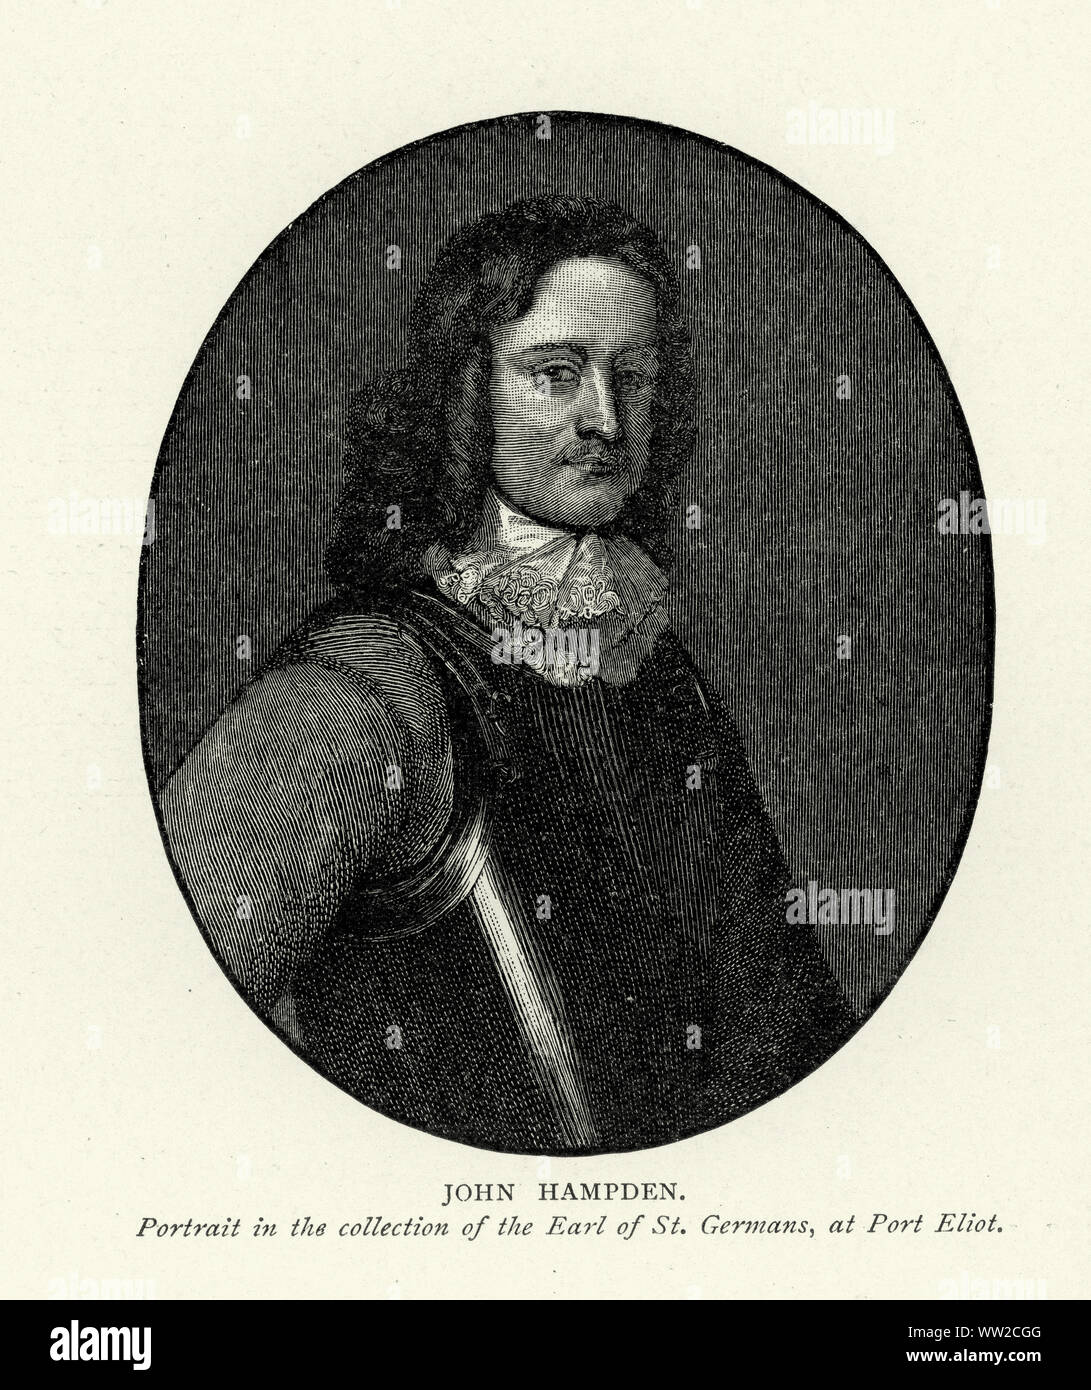 Portrait of John Hampden  (ca. 1594 – 24 June 1643) of Hampden House in the parish of Great Hampden in Buckinghamshire, England, was one of the leading Parliamentarians involved in challenging the authority of King Charles I Stock Photo